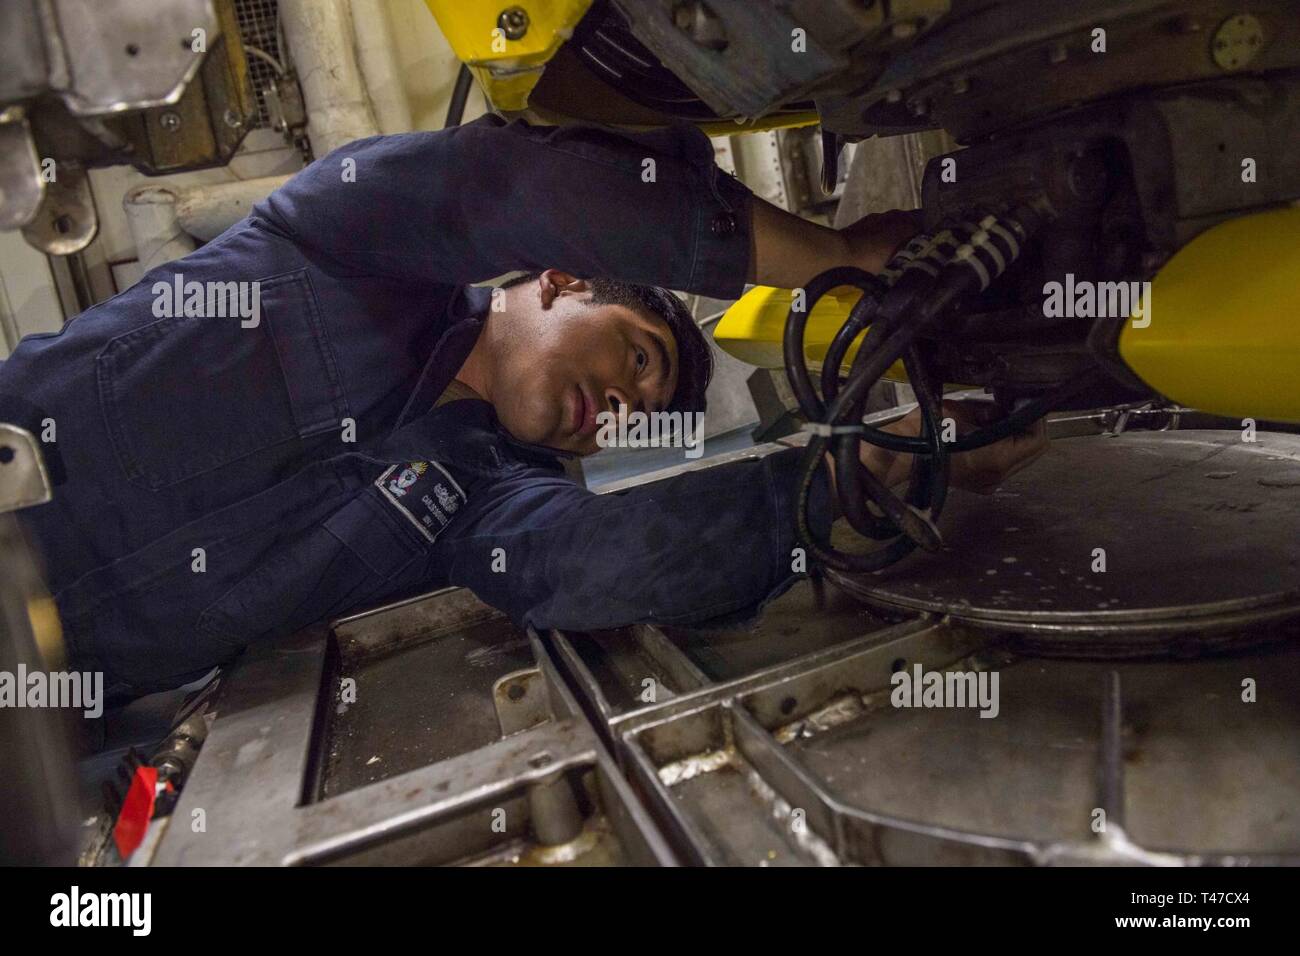 PHILIPPINE SEA (March 15, 2019) Mineman Seaman Carlos Dominguez conducts maintenance on the AN/SQQ 32 Sonar inside the Avenger-class mine countermeasures ship USS Pioneer (MCM 9) as the ship completes a mine hunting training exercise. Pioneer, part of Mine Countermeasure Squadron 7, is operating in the U.S. 7th Fleet area of operations to enhance interoperability with partners and serve as a ready-response platform for contingency operations. Stock Photo